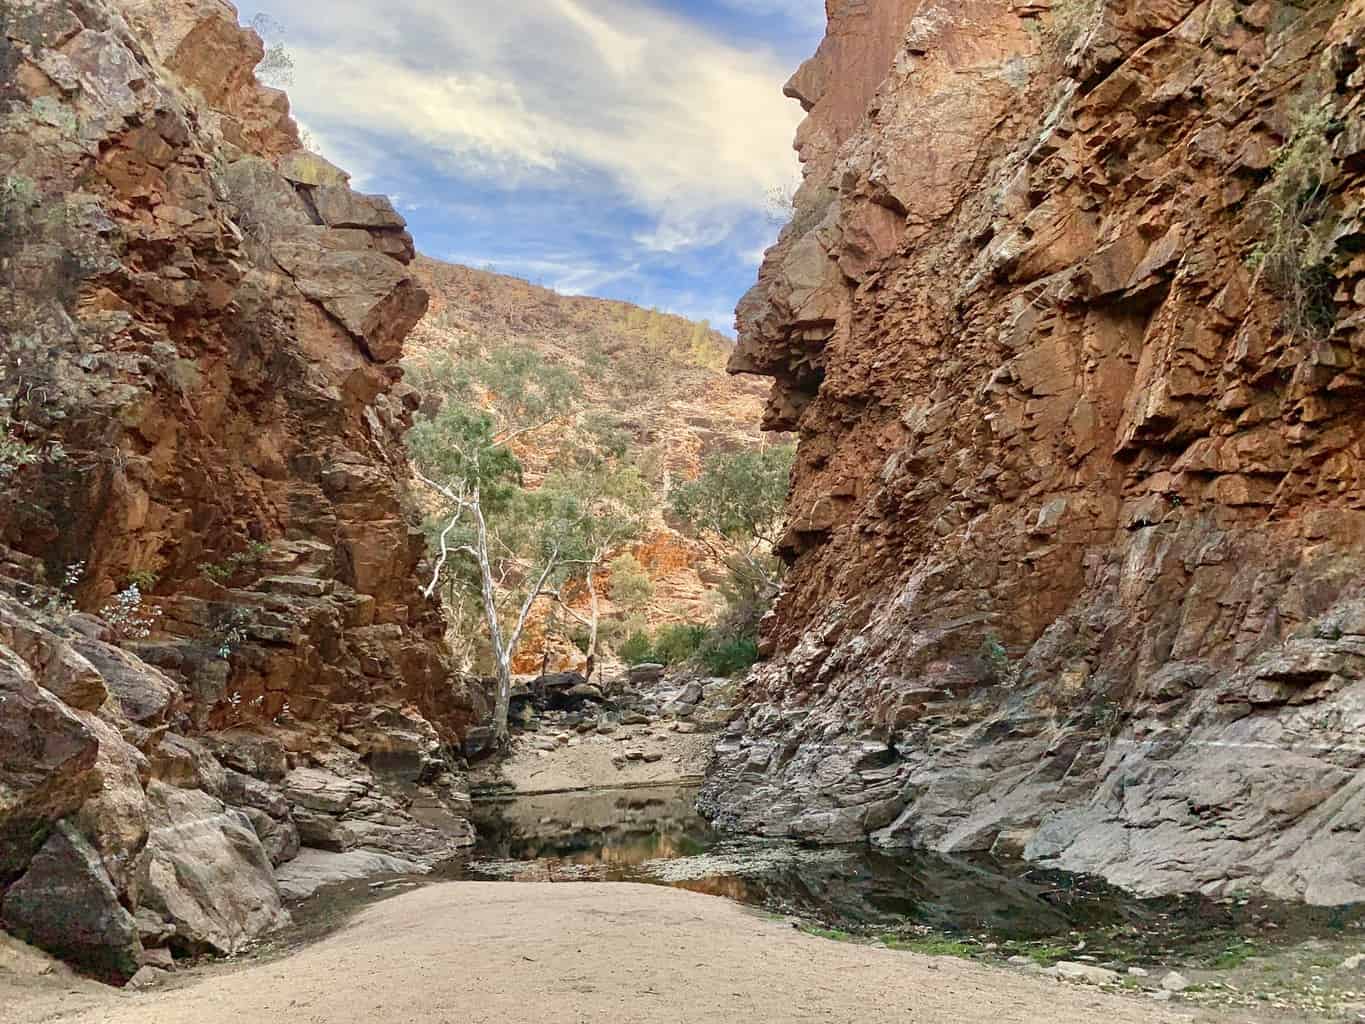 A COMPLETE OVERVIEW of Serpentine Gorge